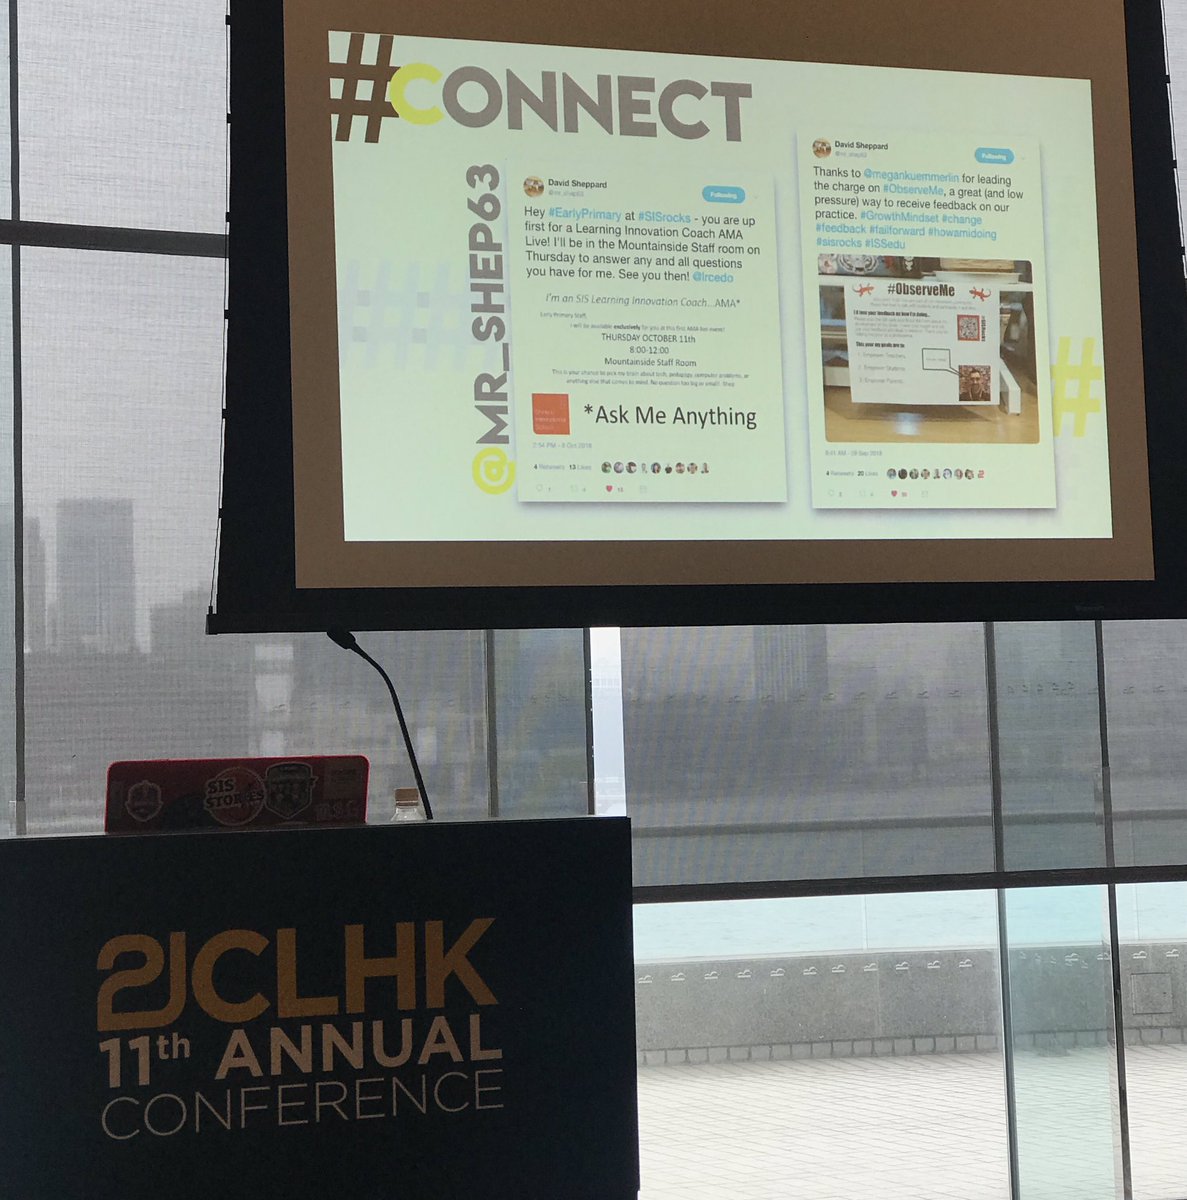 @cecigomez_g helping us understand the power of #socialmedia 2 #deprivatize #empower #share & #connect to #levelup our #classroompractices & those of friends around the world #desc #sisrocks #21clhk